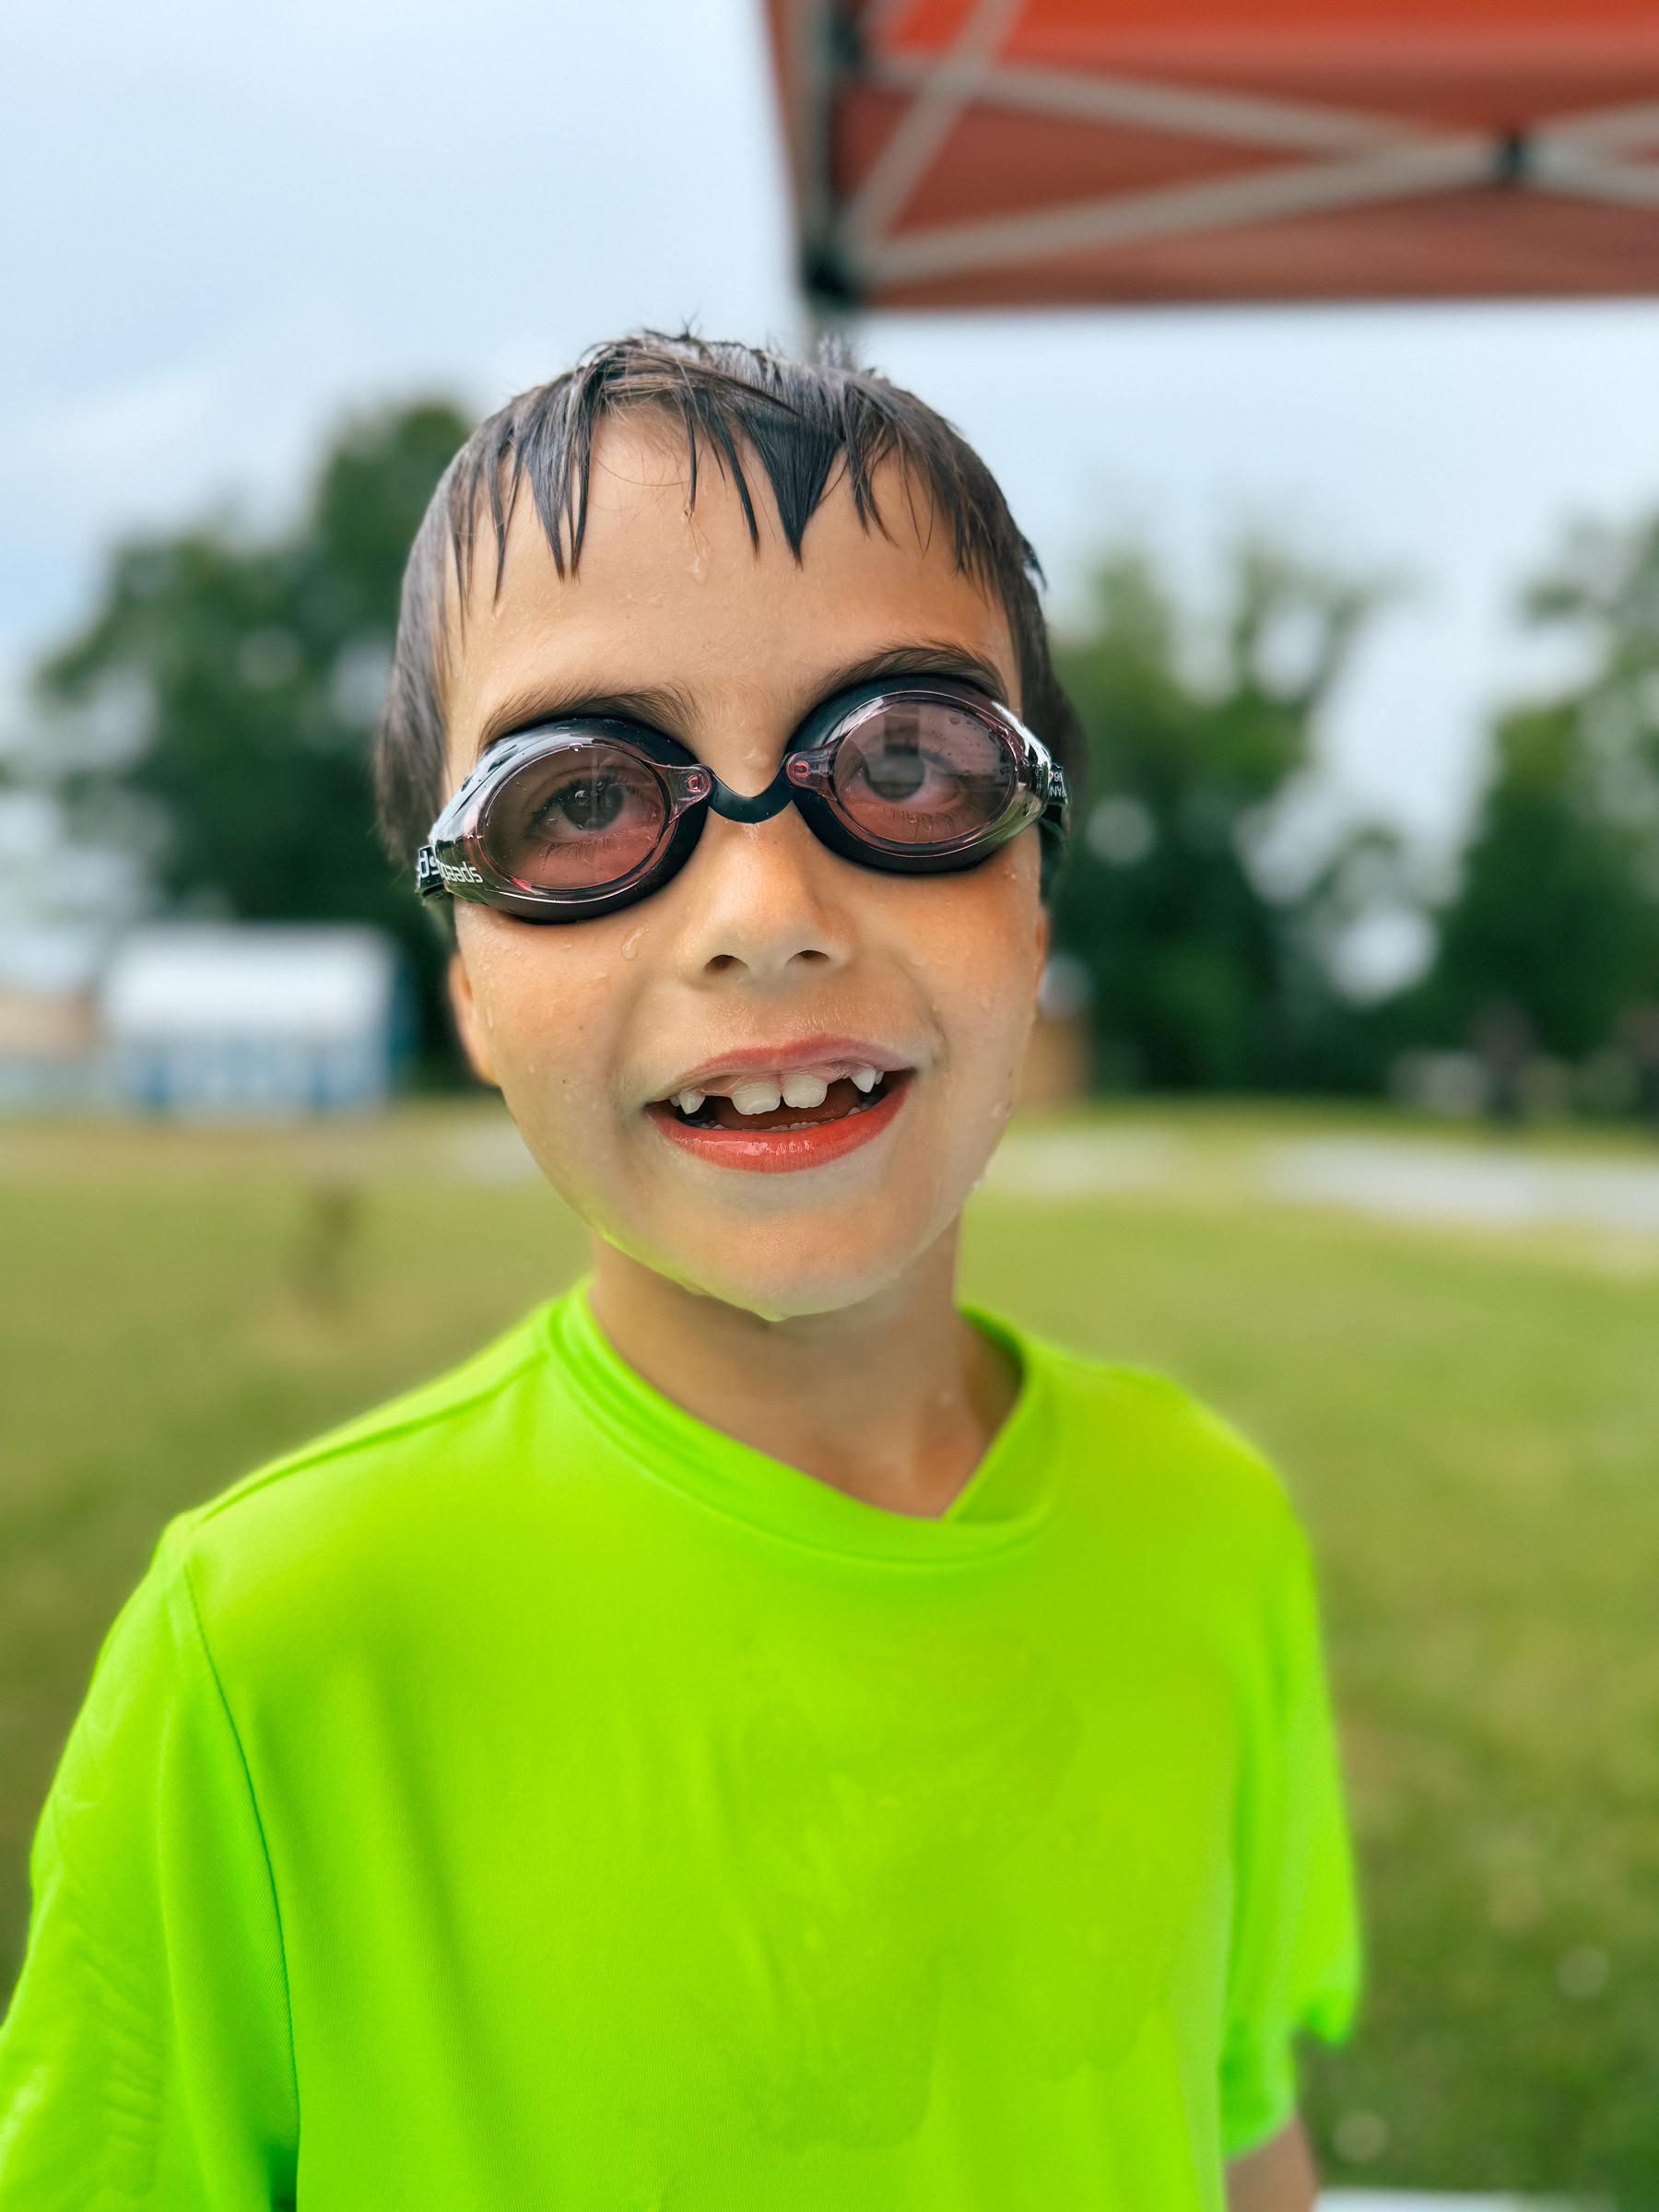 A boy in swimming goggles